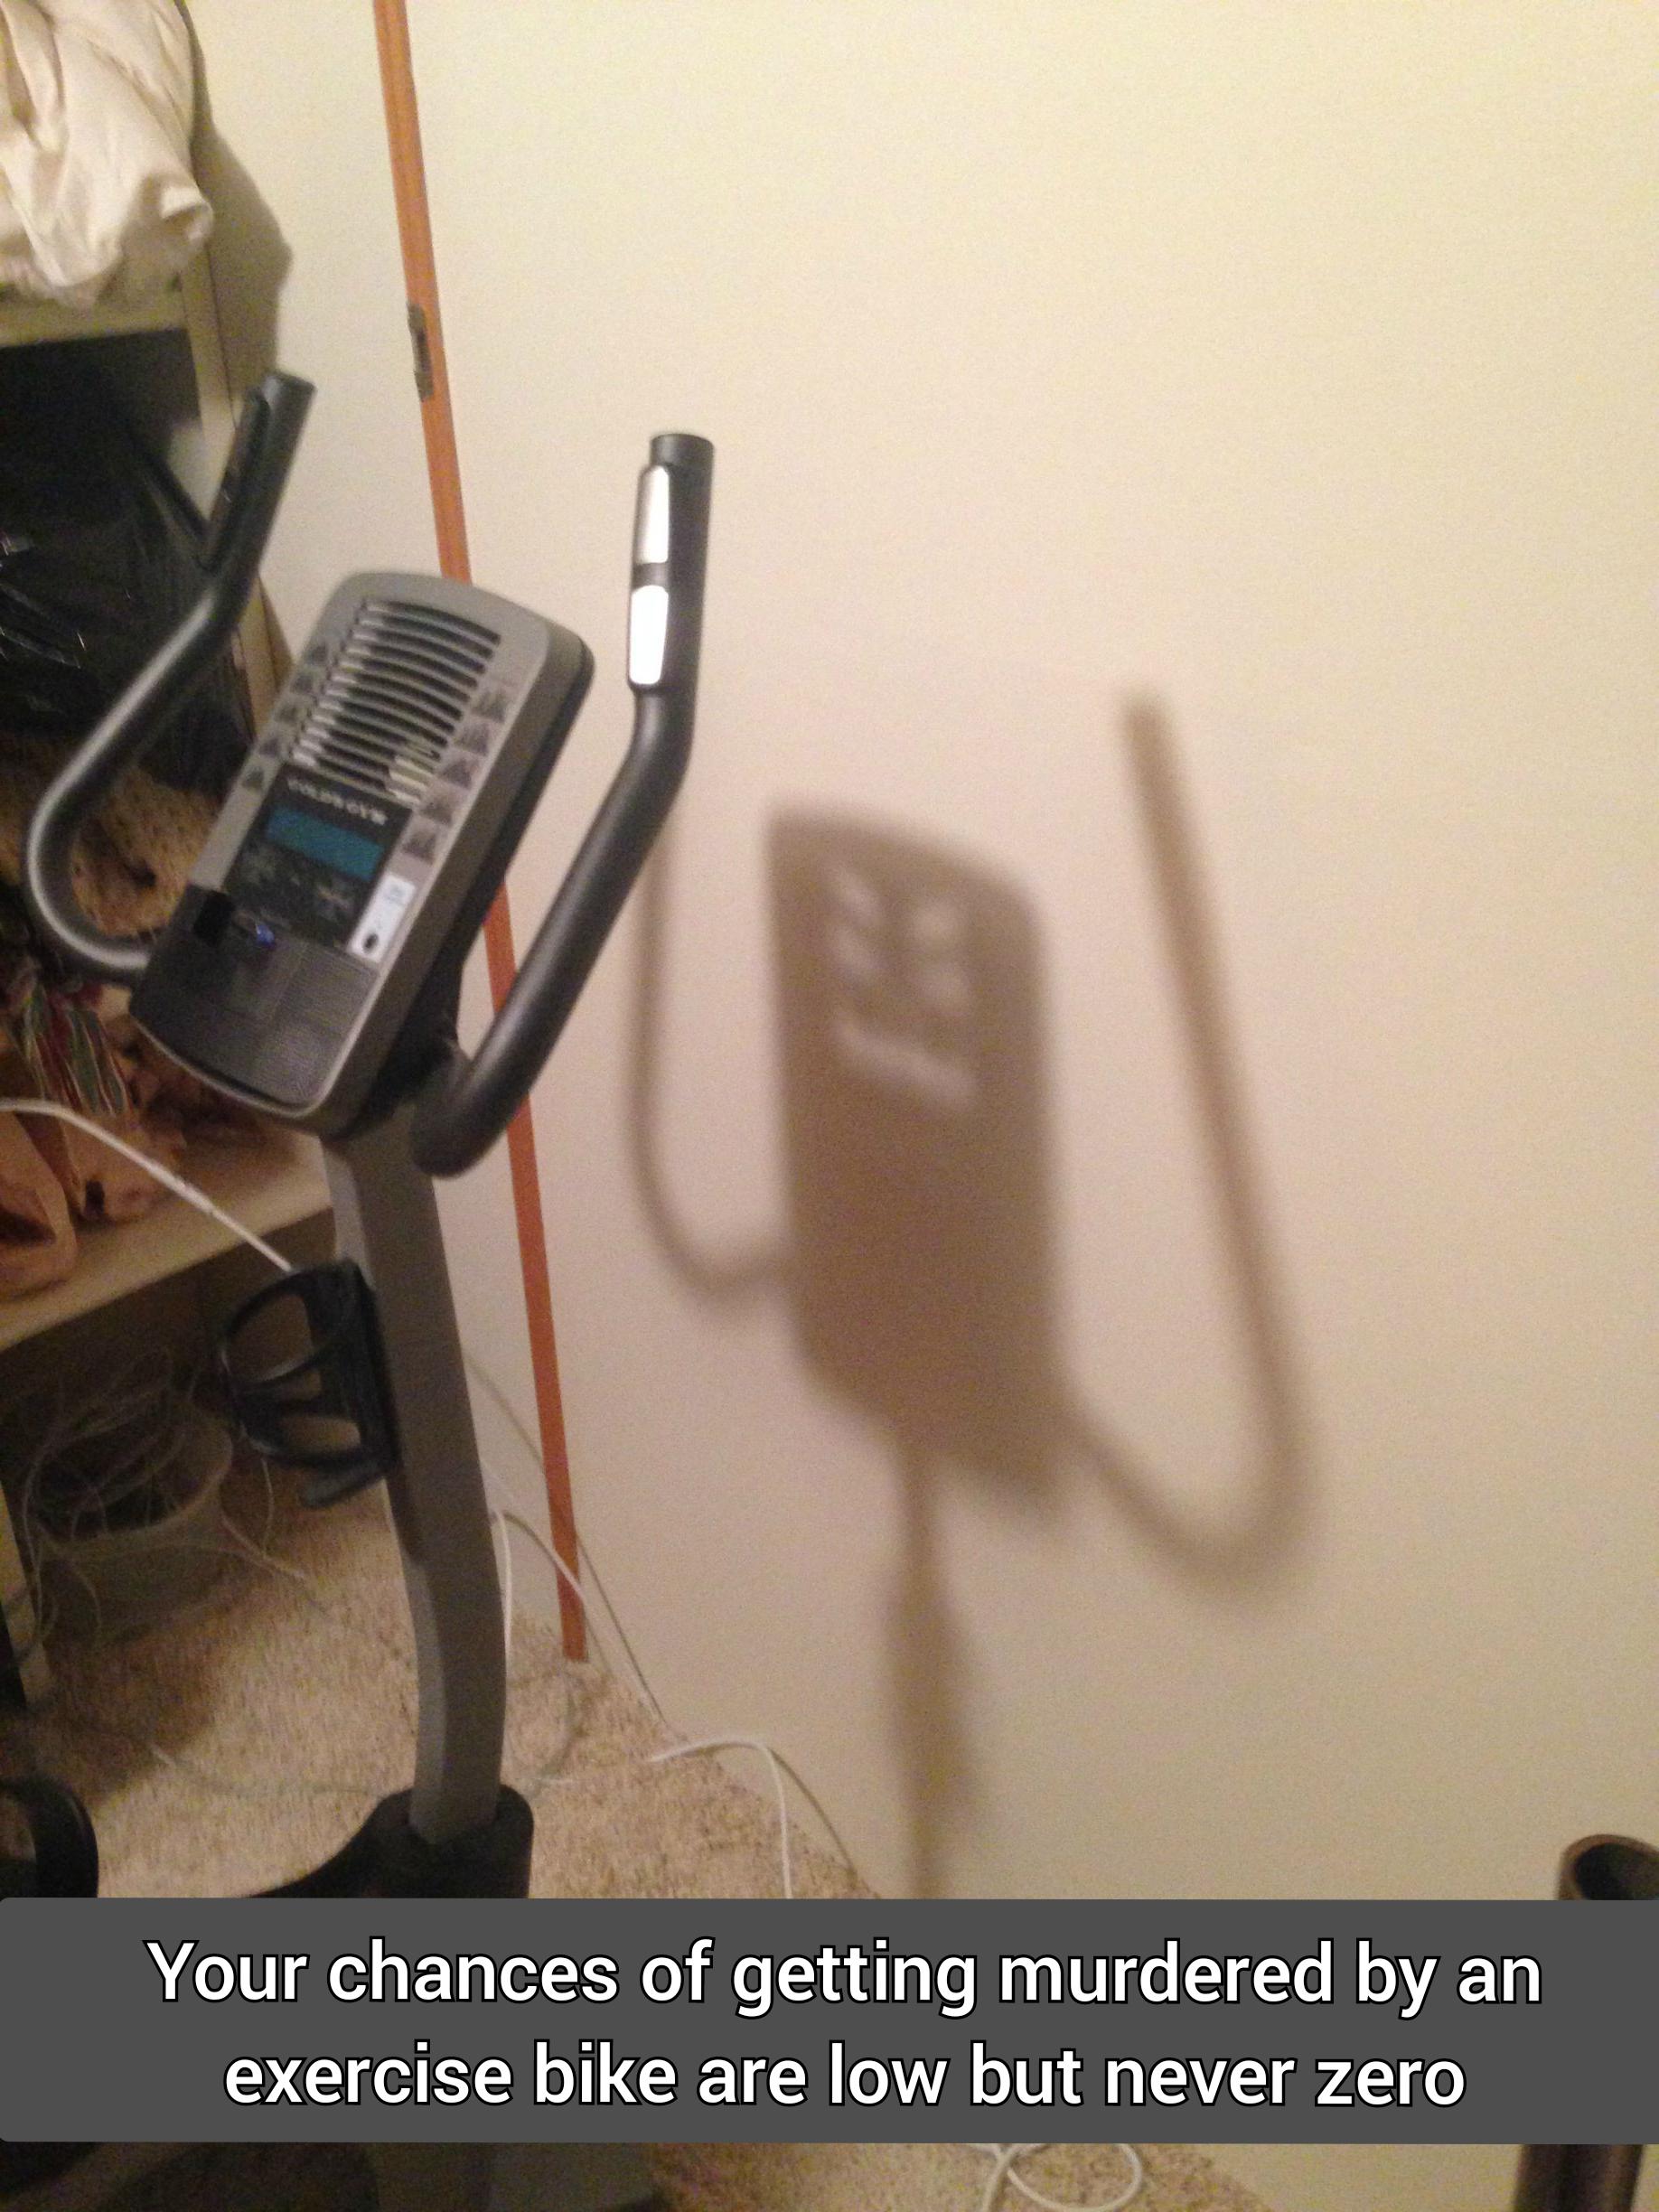 shadow looks like monster - Your chances of getting murdered by an exercise bike are low but never zero